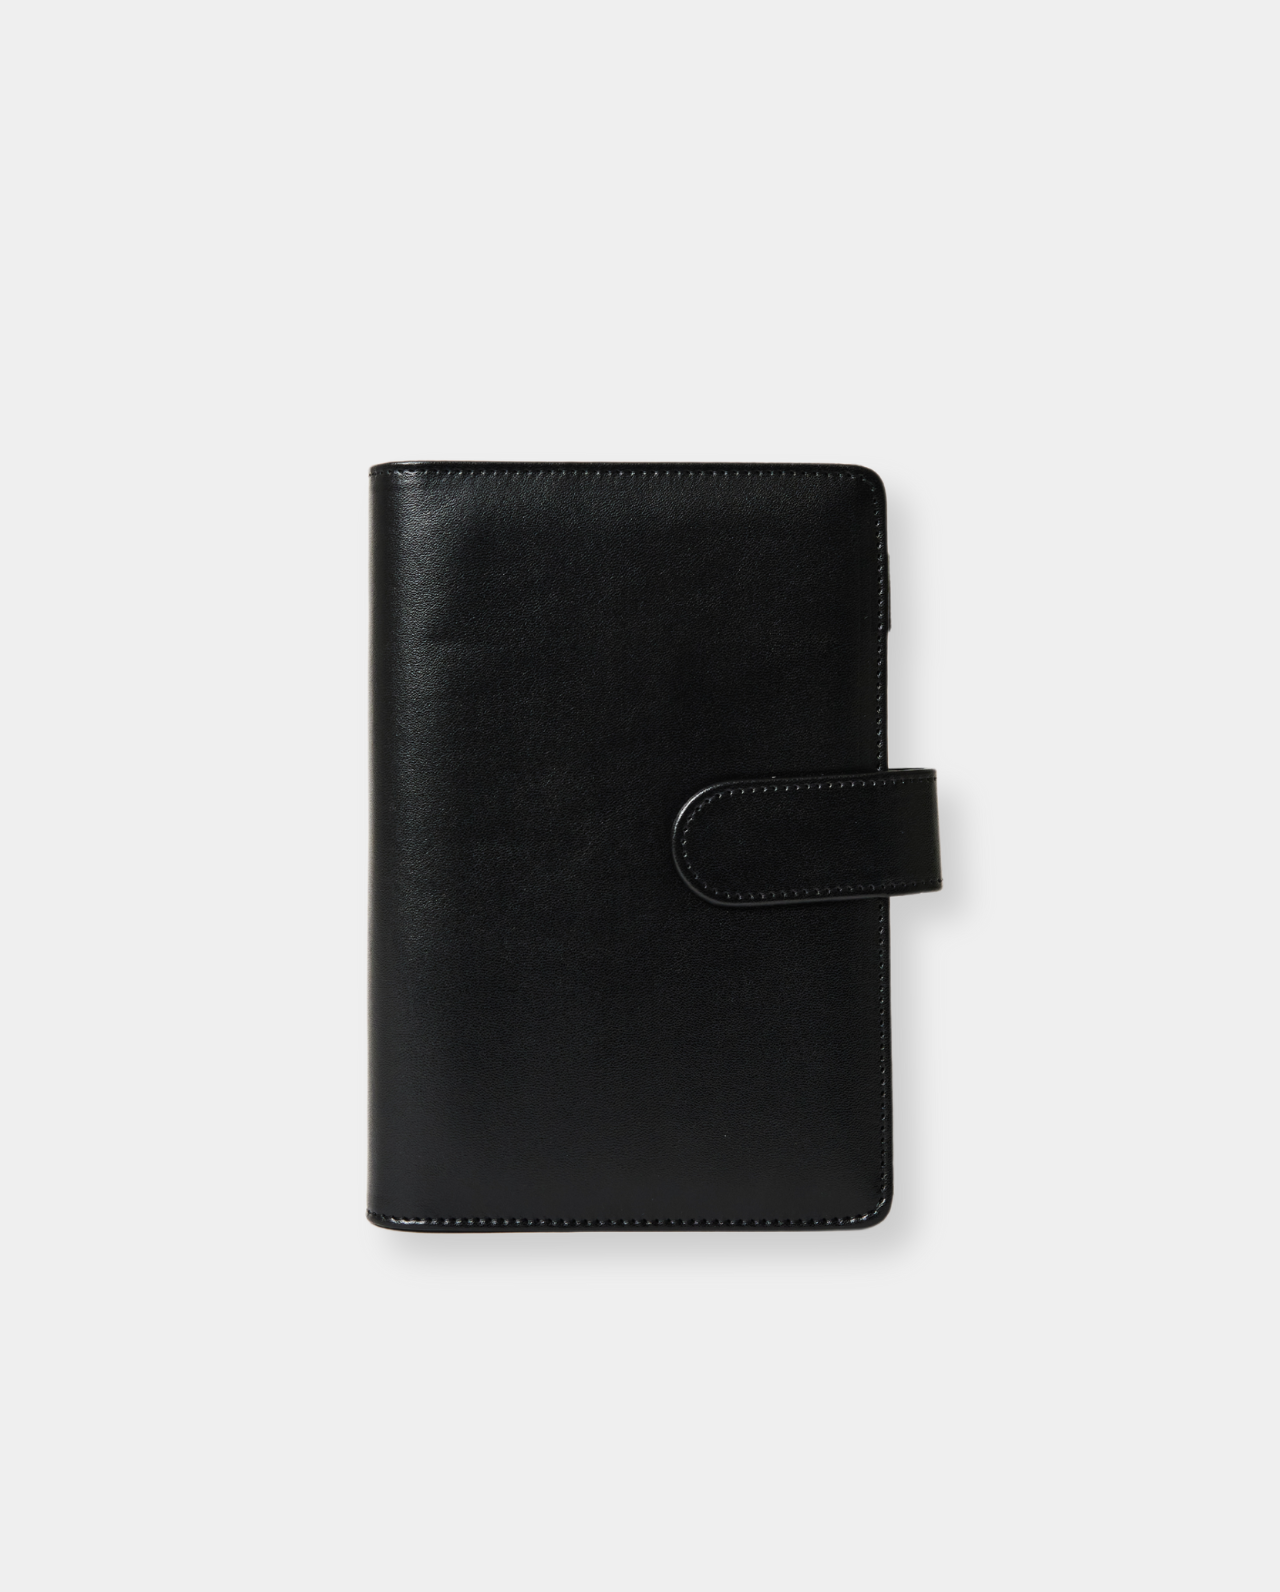 The Vegan Leather Agenda | Personal Size (6-Ring Planner)